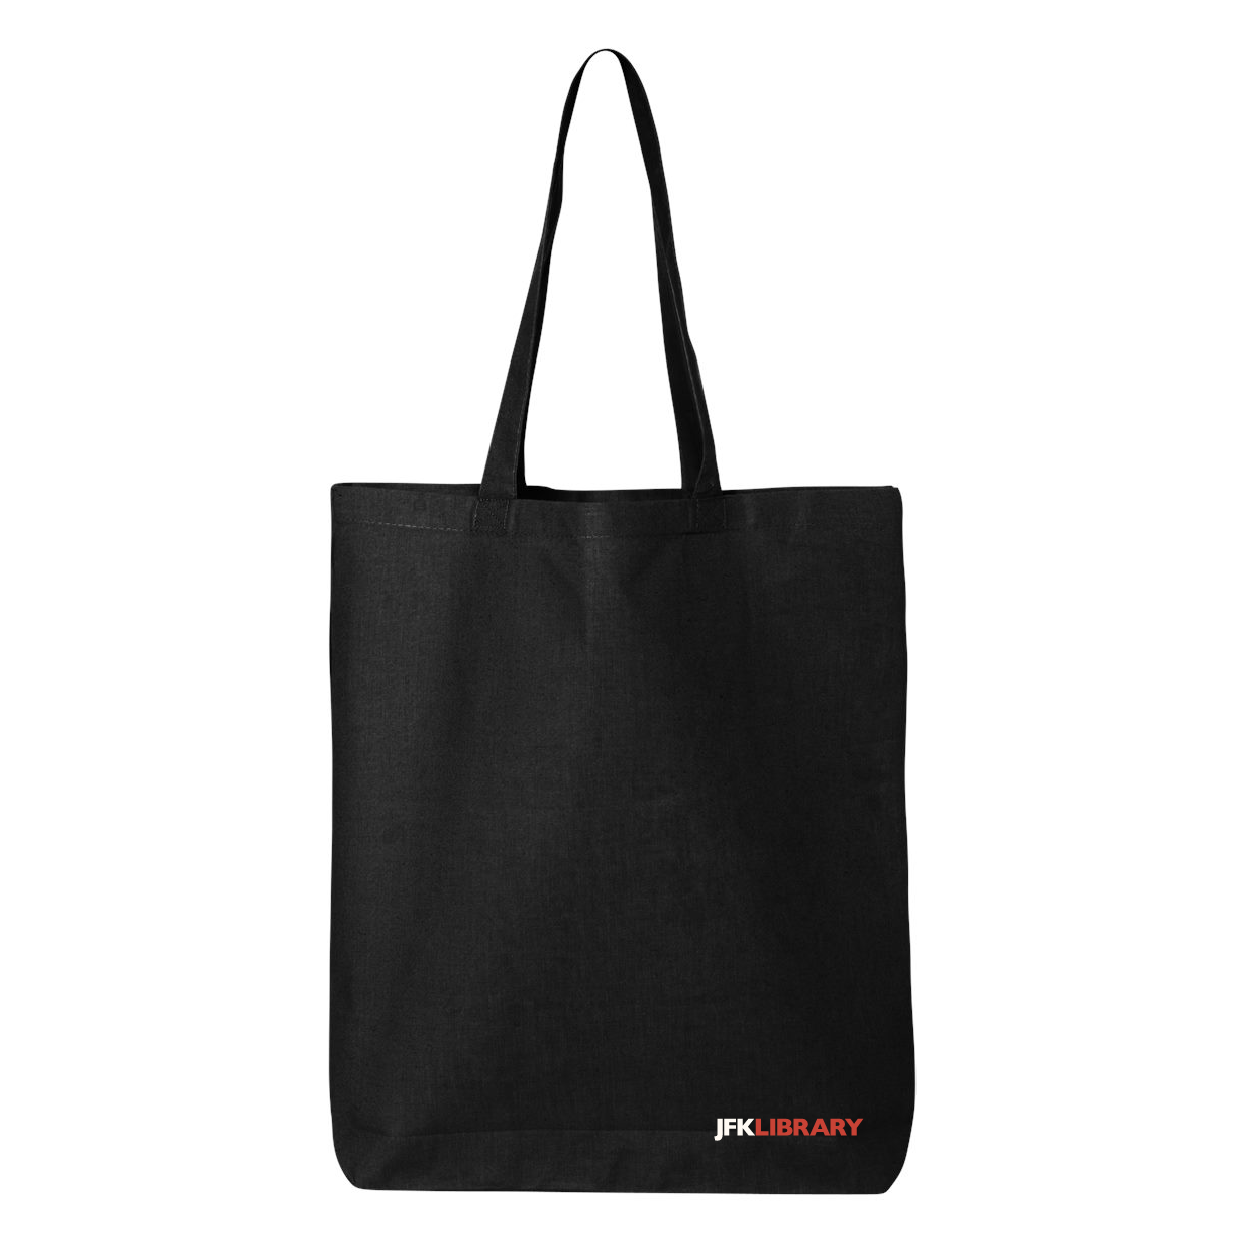 Ask What You Can Do Tote Bag